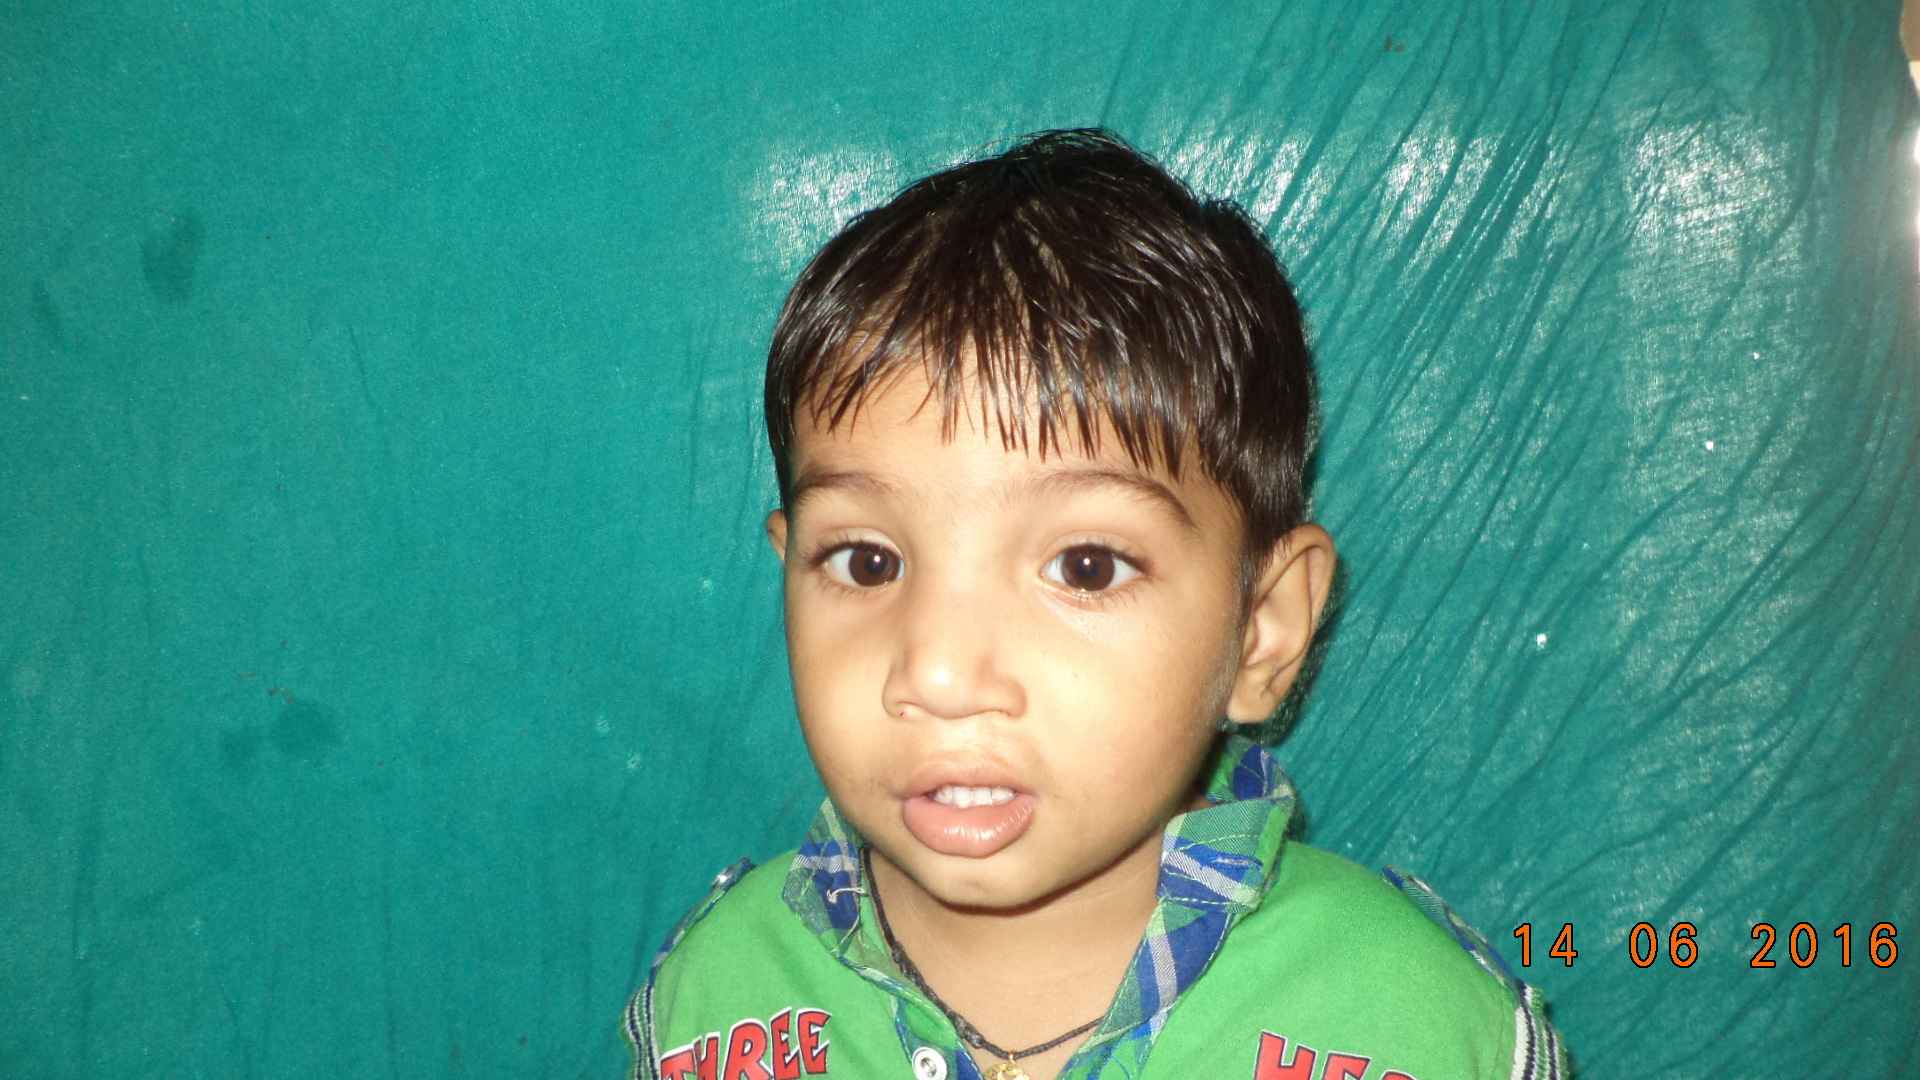 Cleft Lip Surgery in Agra